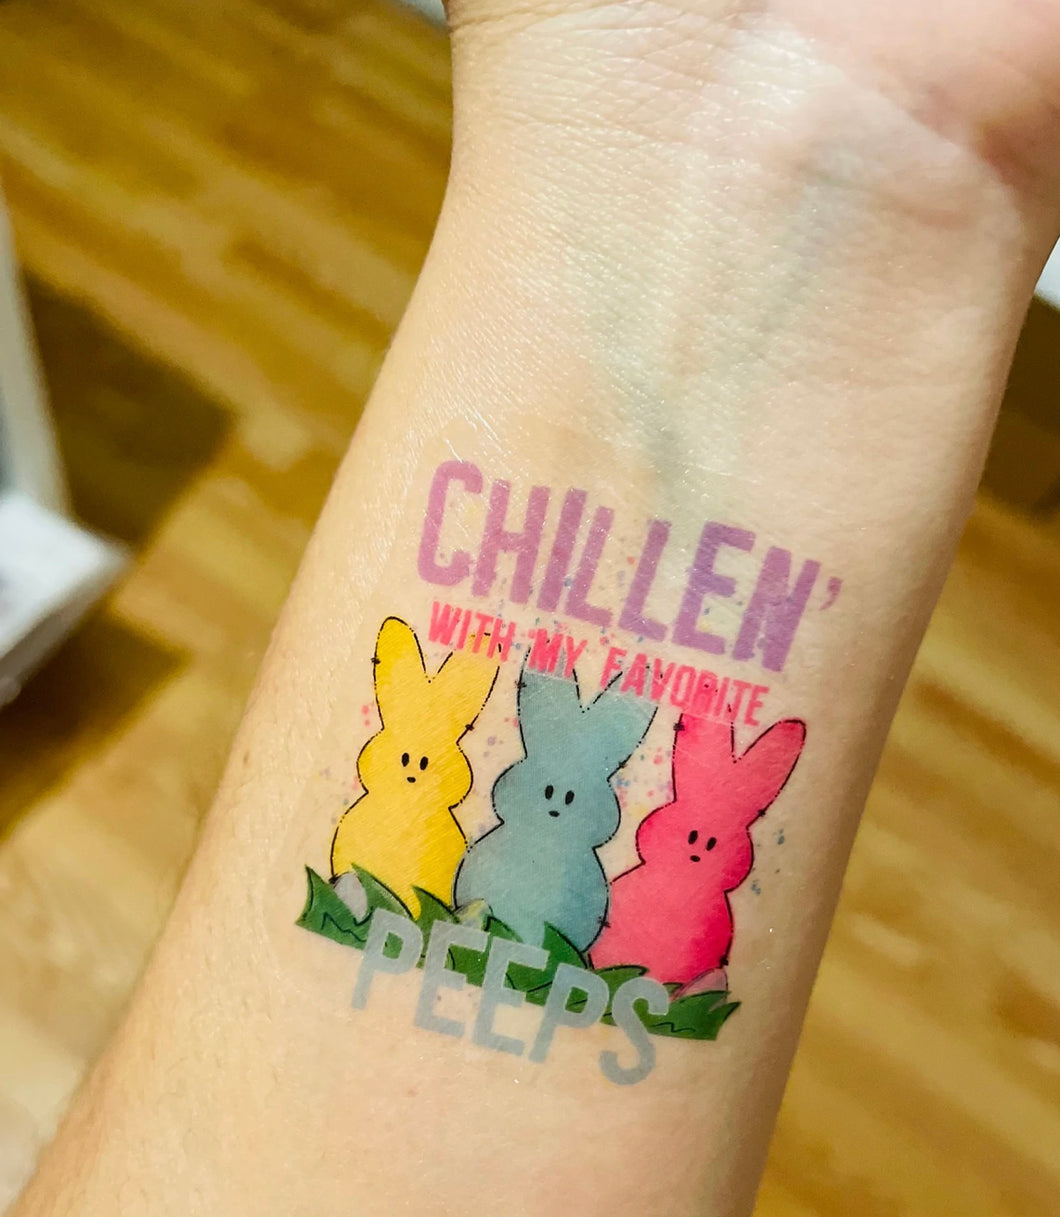 Chillen’ with my favorite peeps temporary tattoos